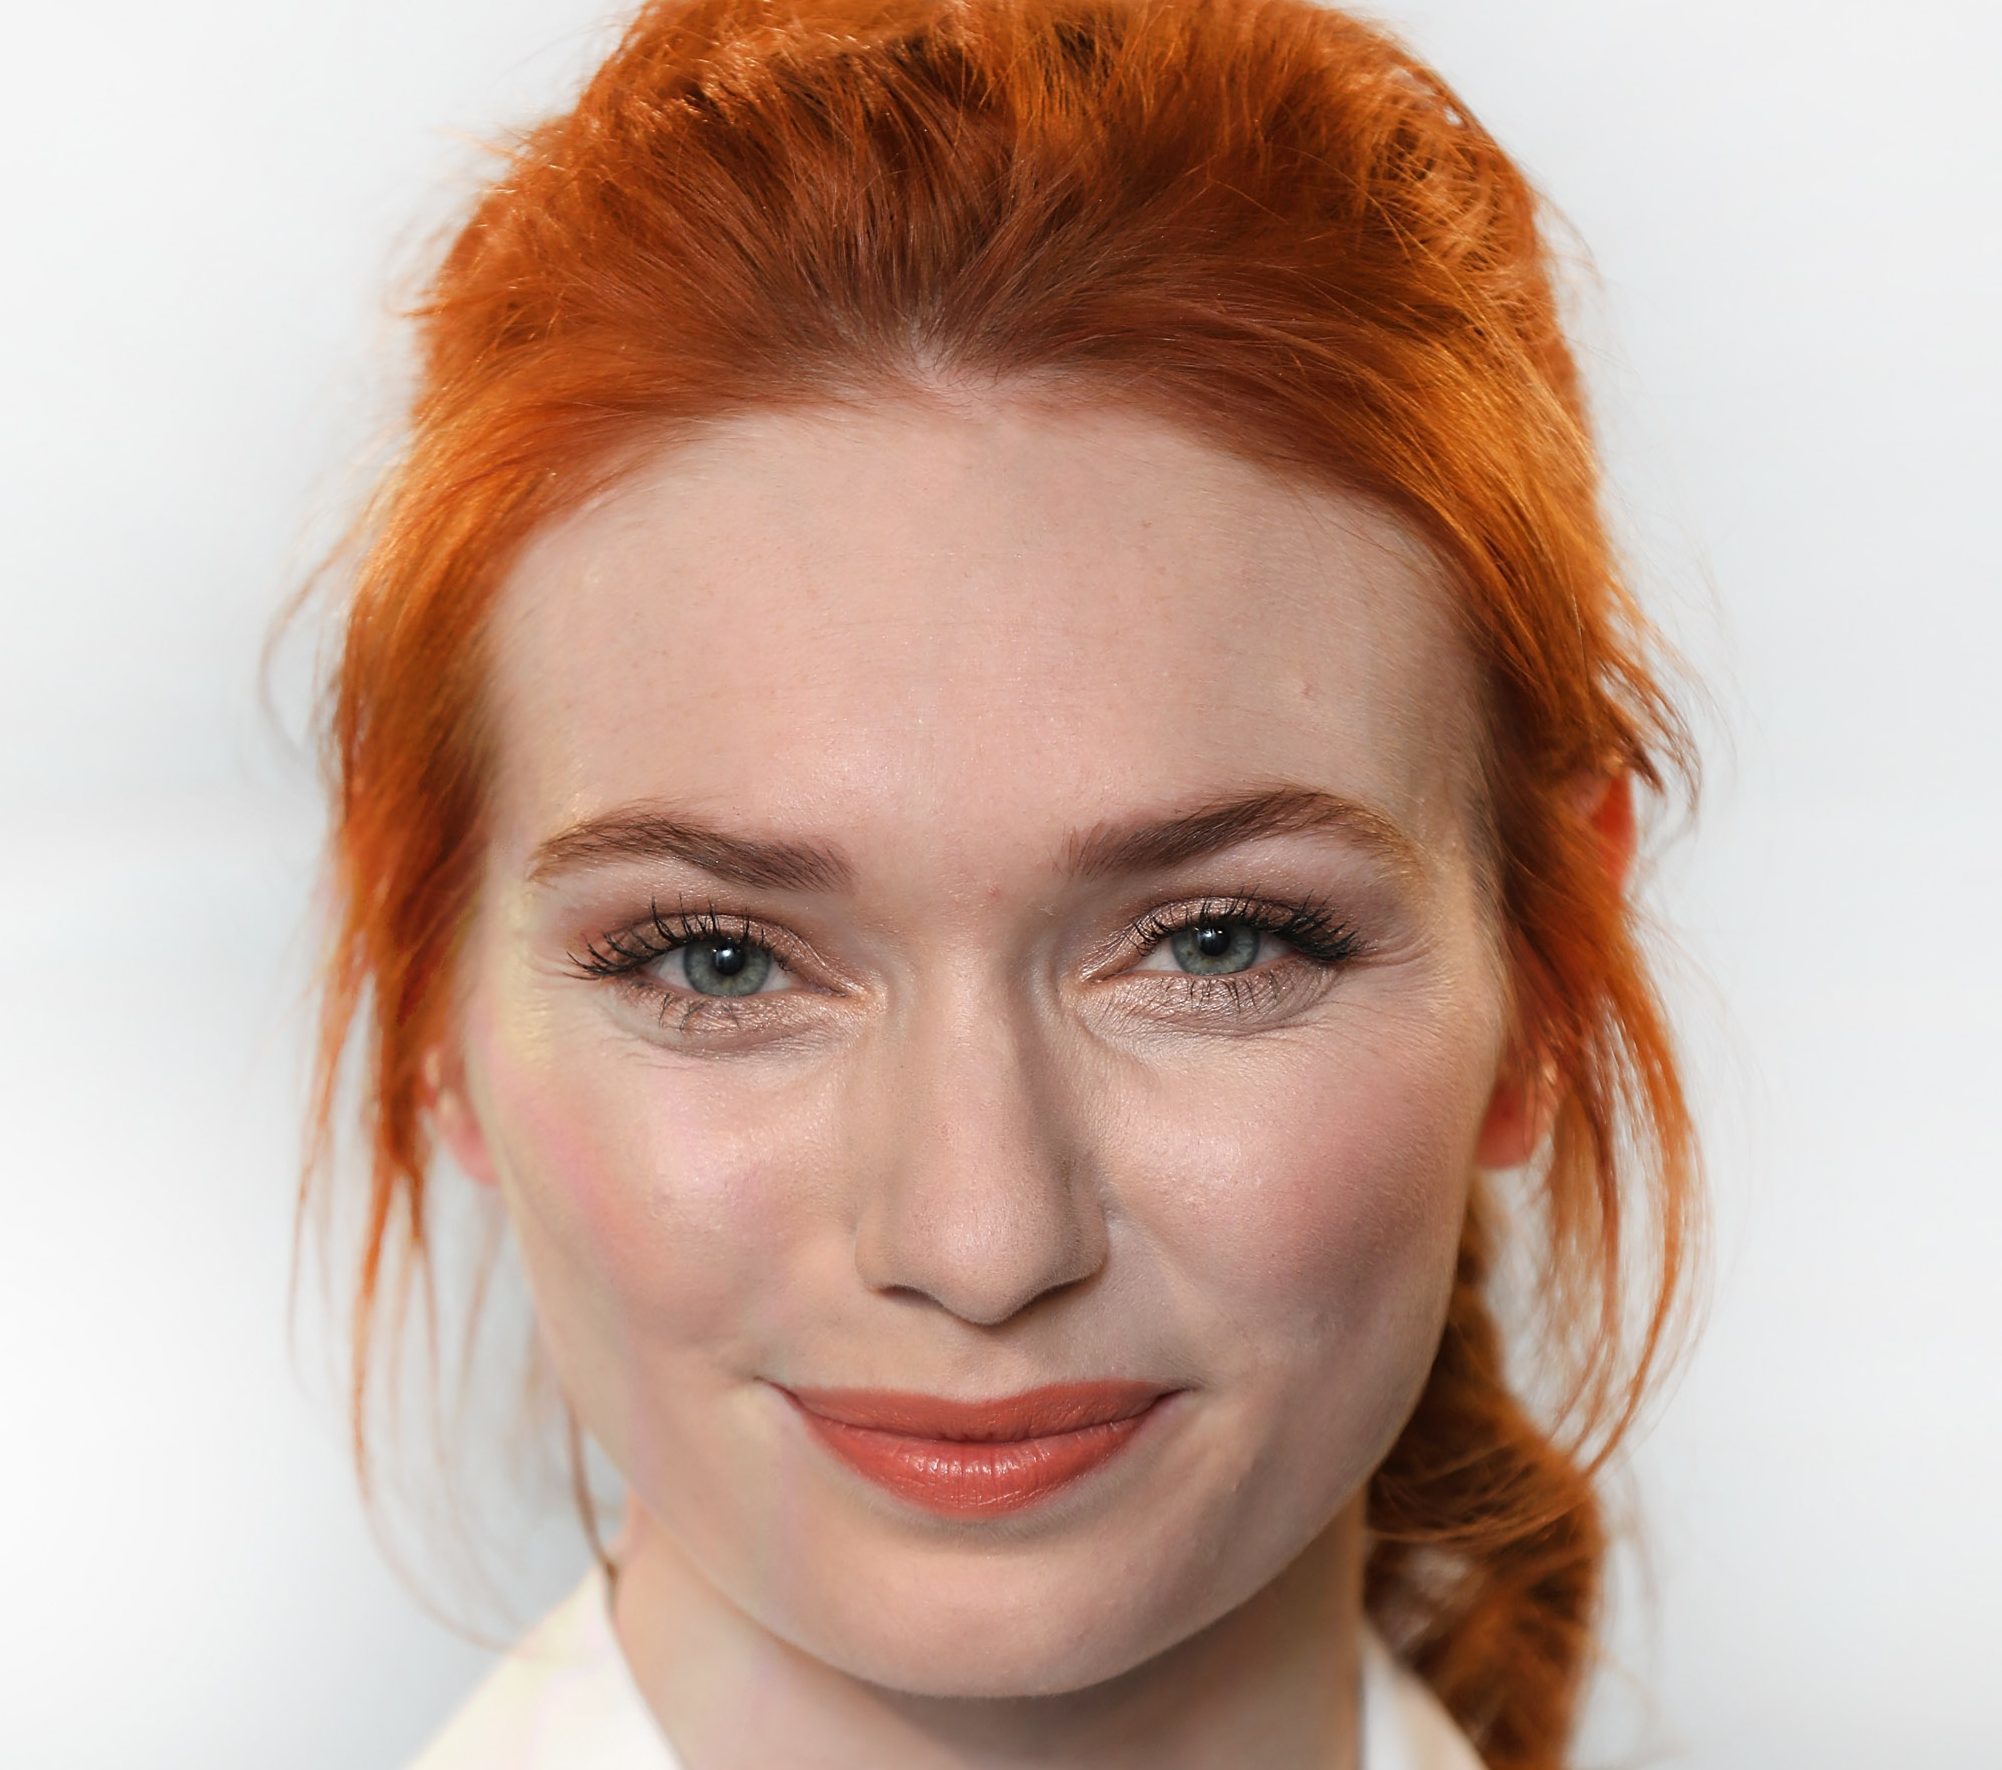 Actress Eleanor Tomlinson told BBC Breakfast she spends time perfecting her 'cliff stare' (Tim P. Whitby/Getty Images)